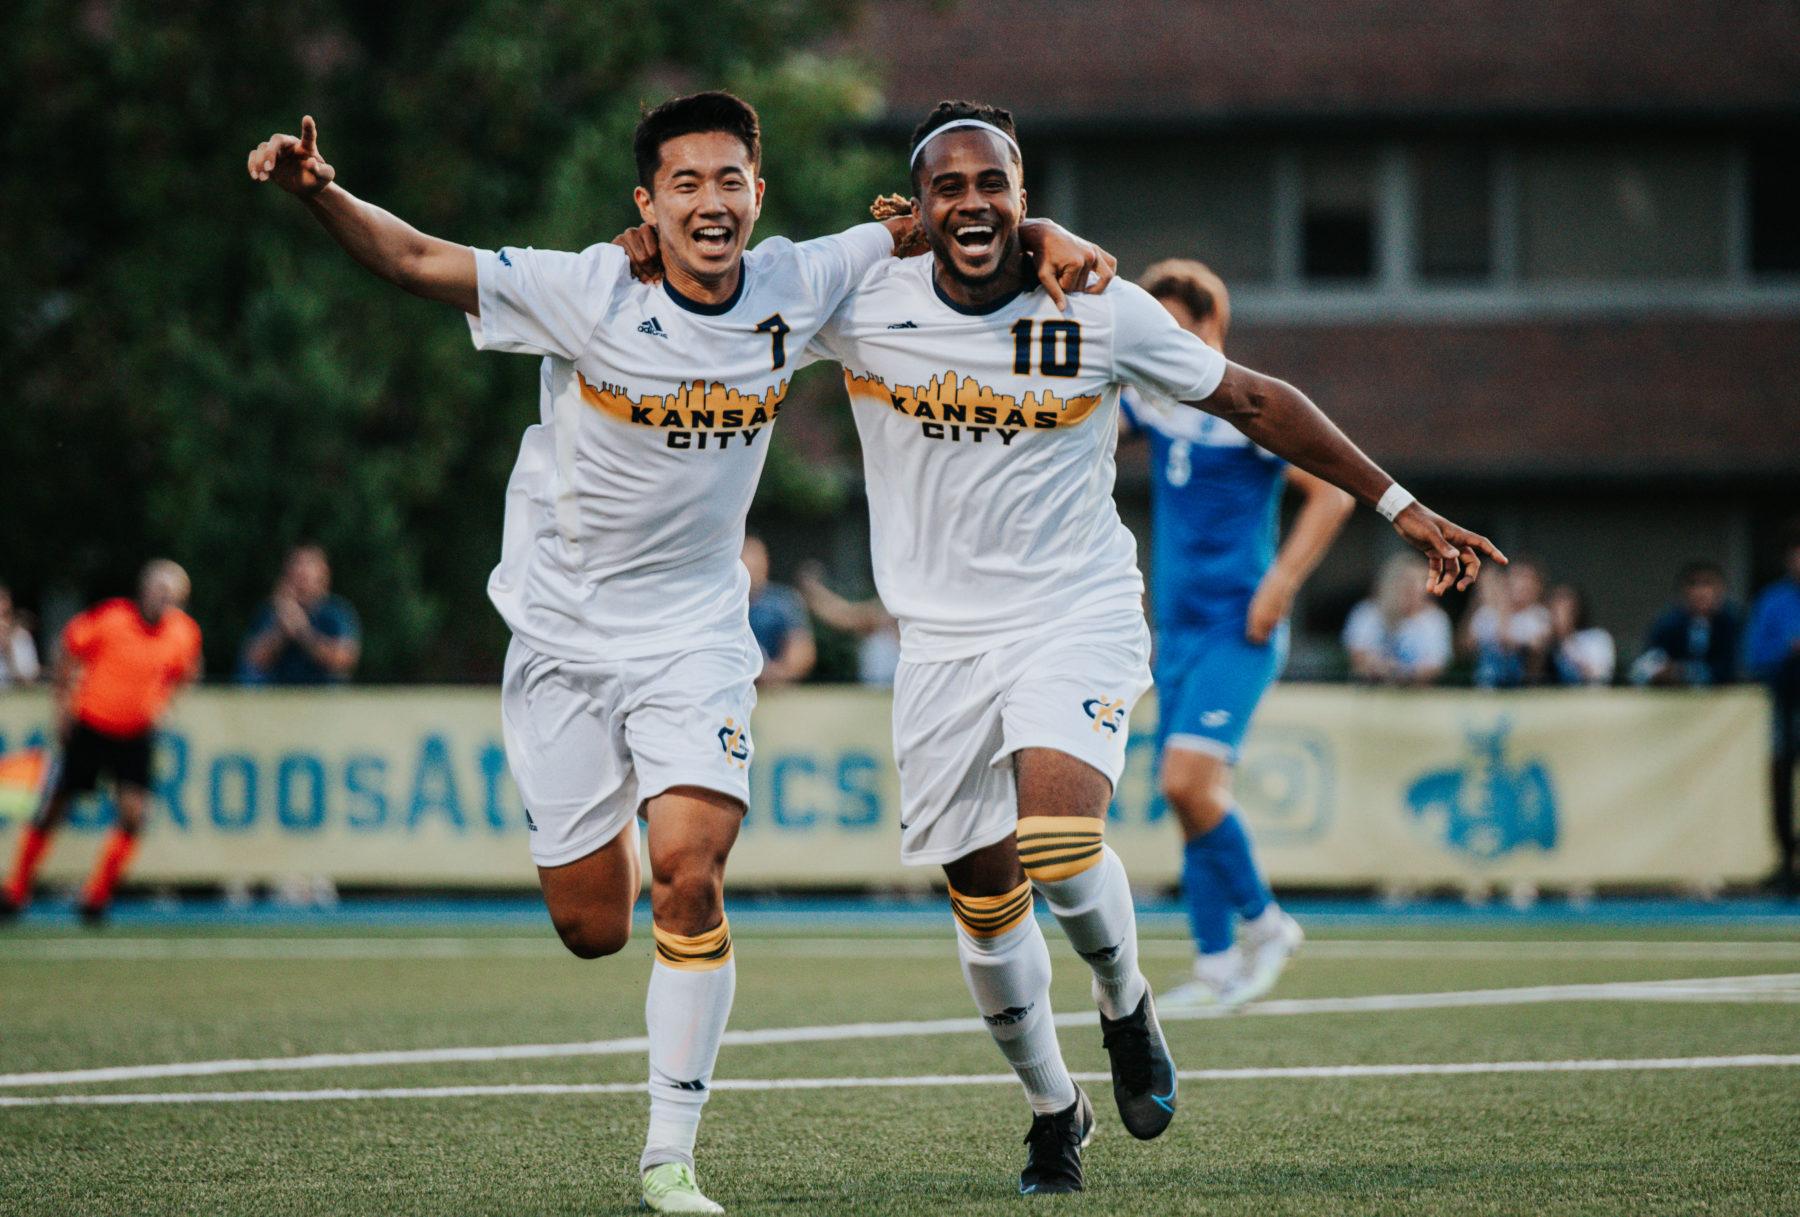 With+an+assist+from+Christian+Koffi+and+goal+by+Kazuki+Kimbura%2C+Roos+win+2-1+against+Rockhurst+University.